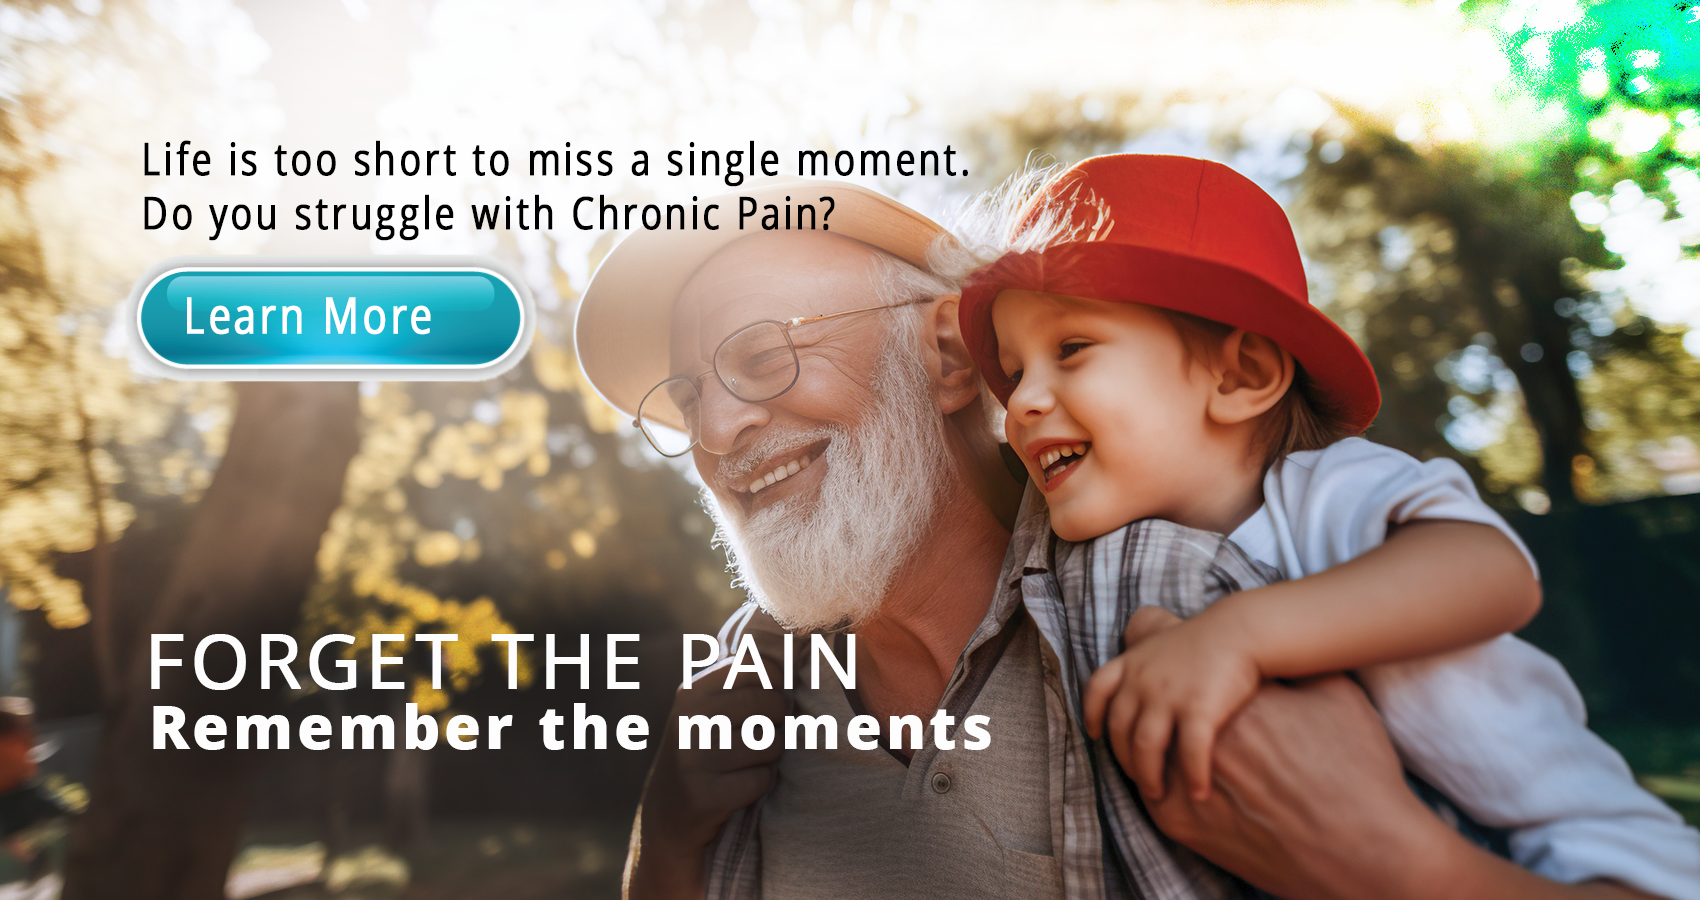 Forget the pain. Remember the moments. Life is too short to miss a single moment. If you struggle with chronic pain, learn more about Curry Health Network's pain management program.